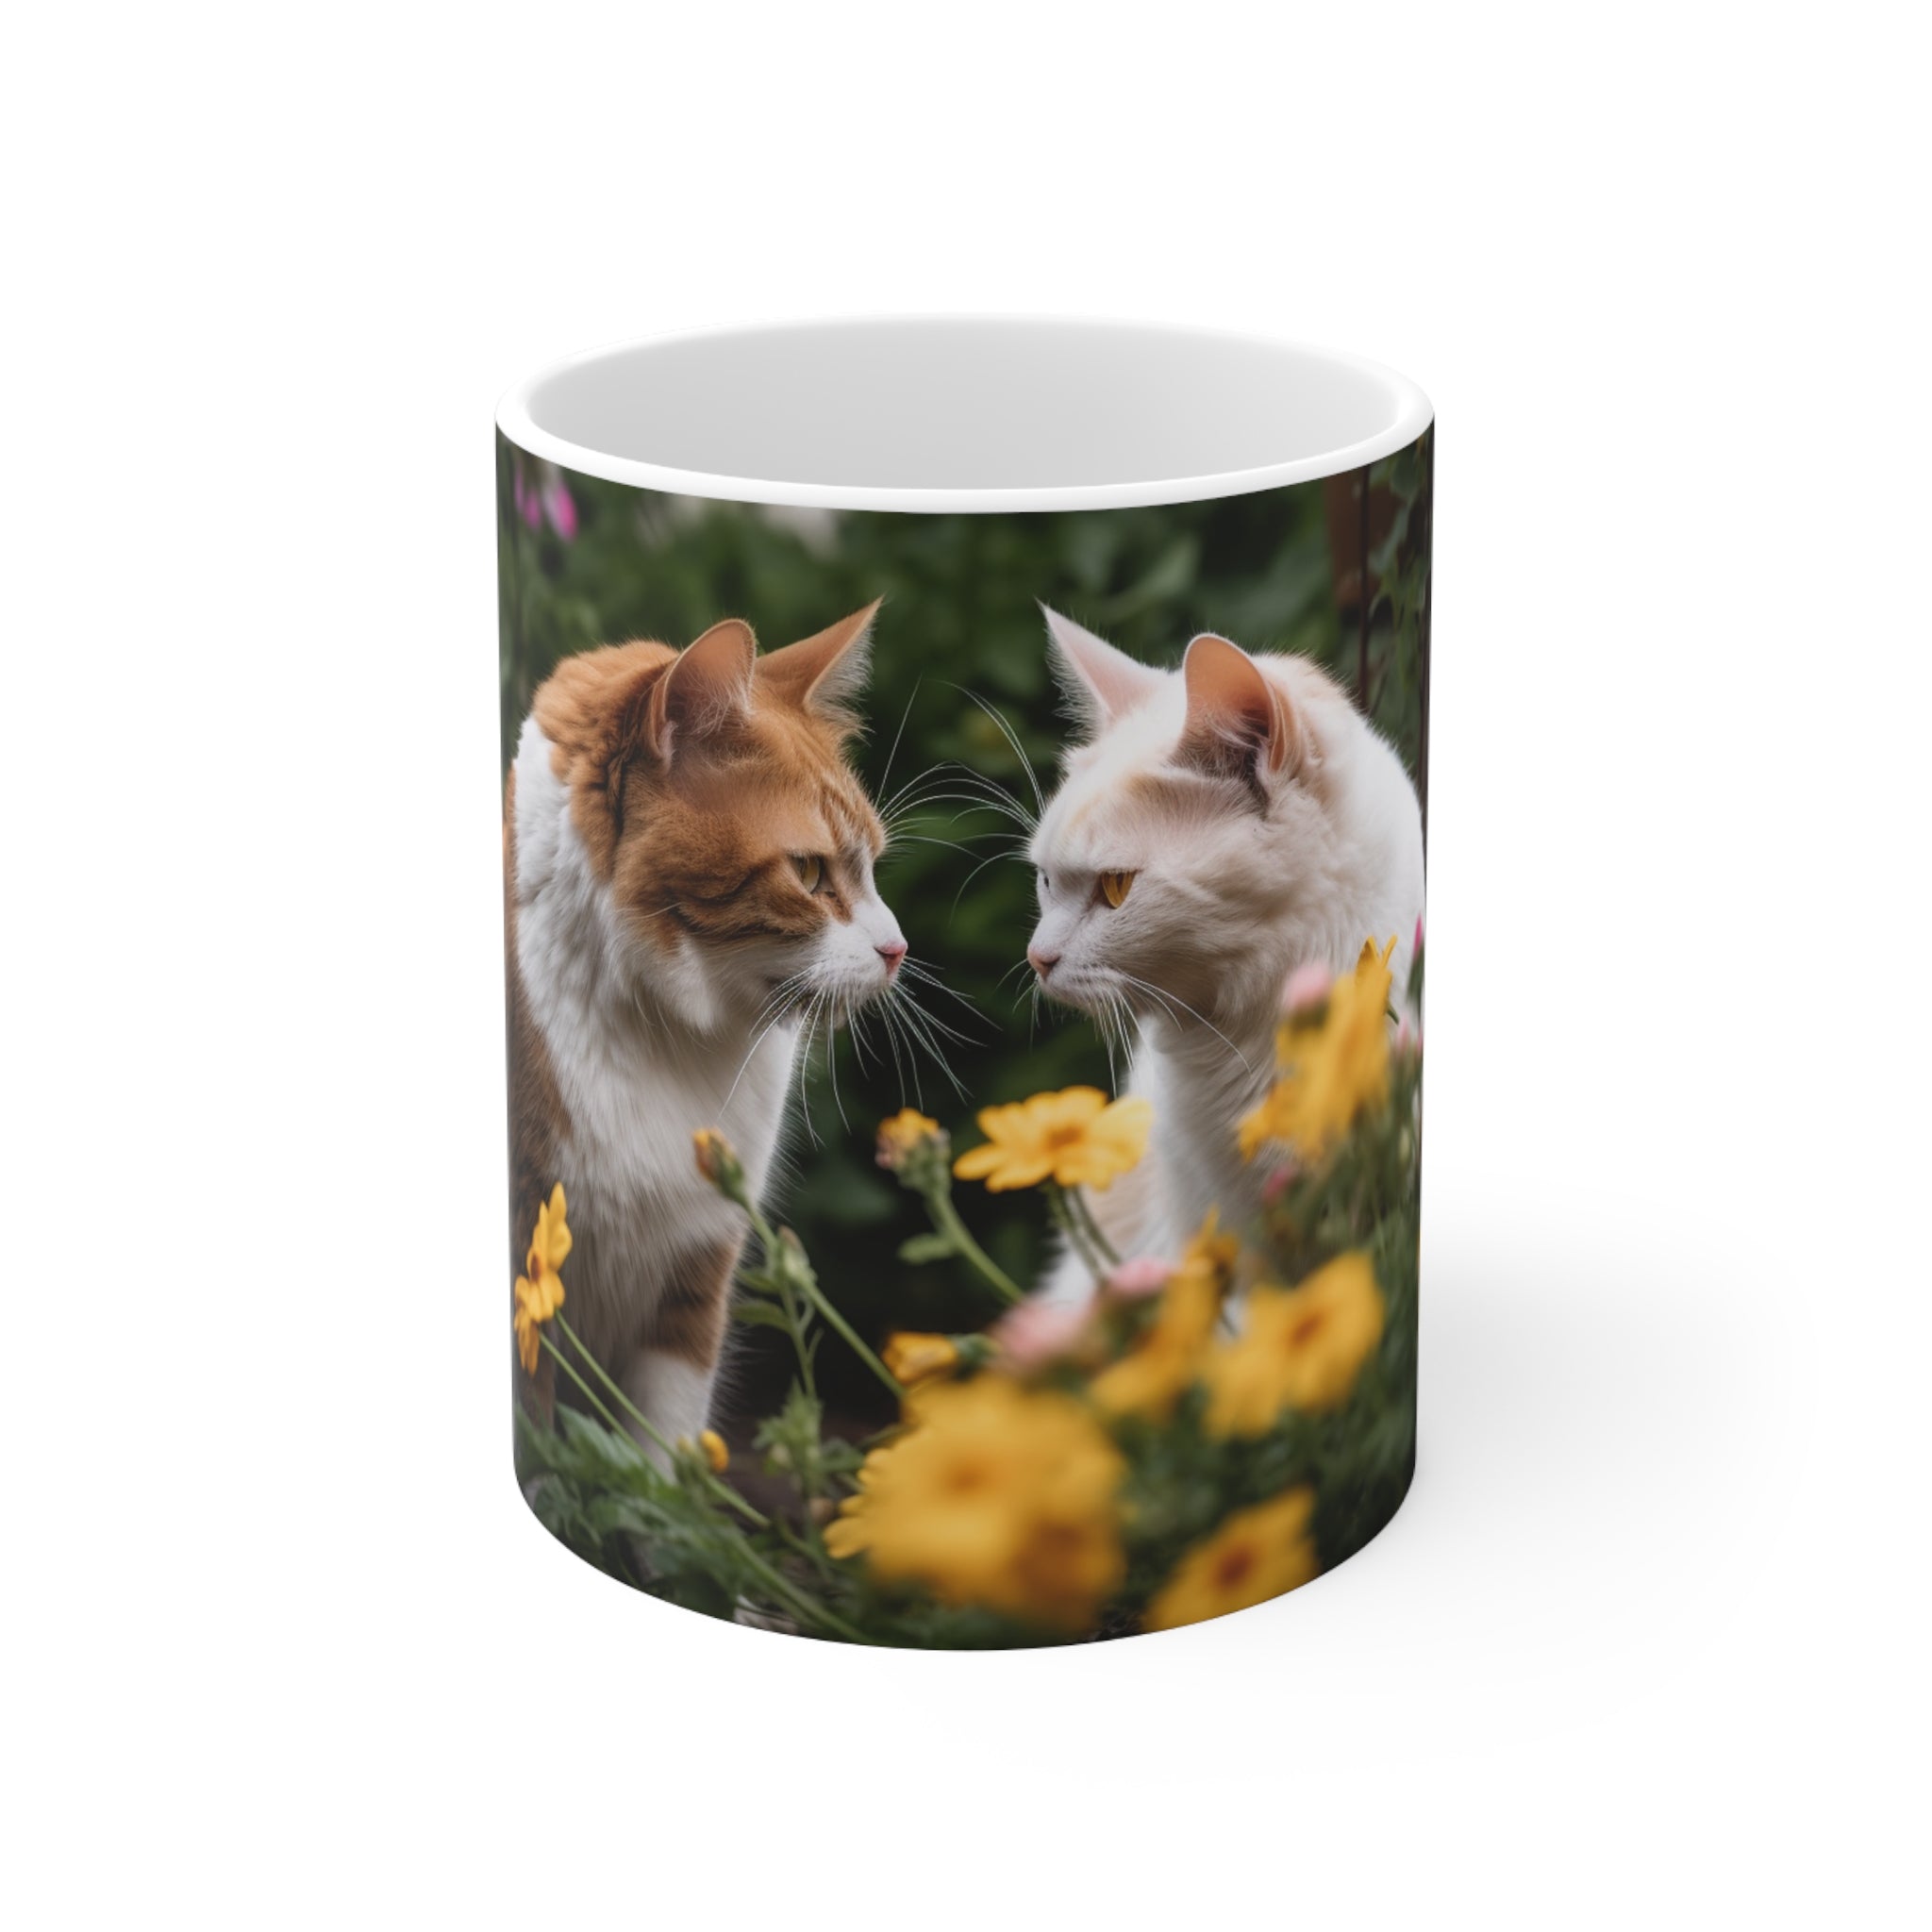 Cat Feline Party Adorable Garden Ceramic Mug 11oz - Perfect Gift for Cat Lovers & Garden Enthusiasts Gift for Pet Lovers and Cat Owners